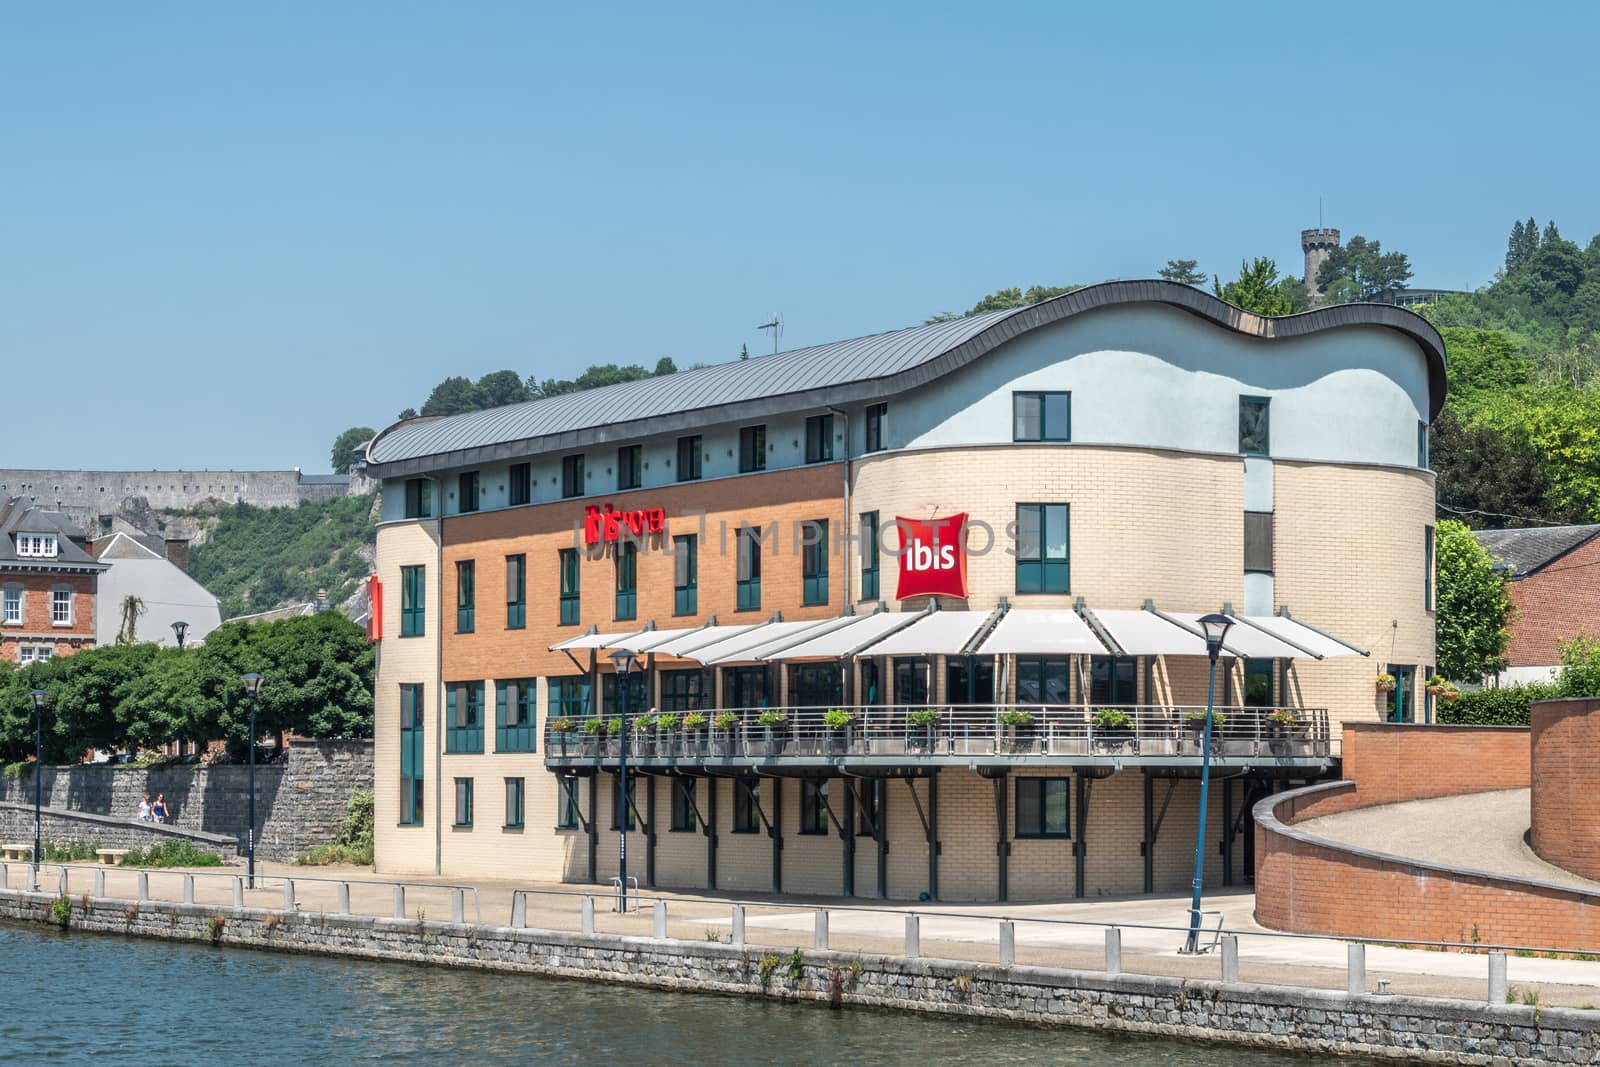 Dinant, Belgium - June 26, 2019: Beige and red stone building of Ibis Hotel along Meuse River backed by green foliage.